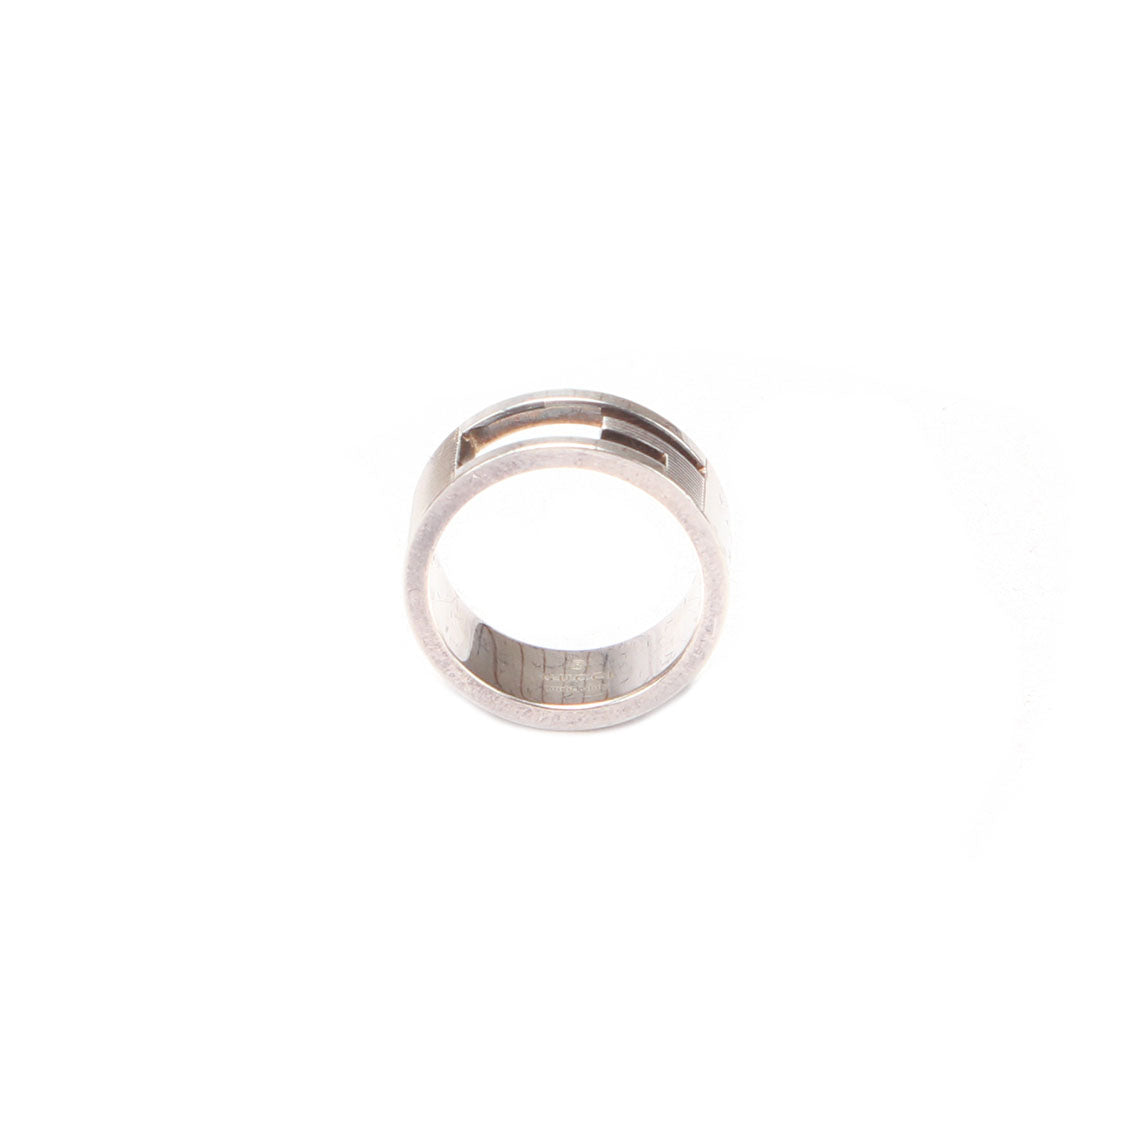 Gucci Cutout G Silver Ring Metal Ring in Good condition